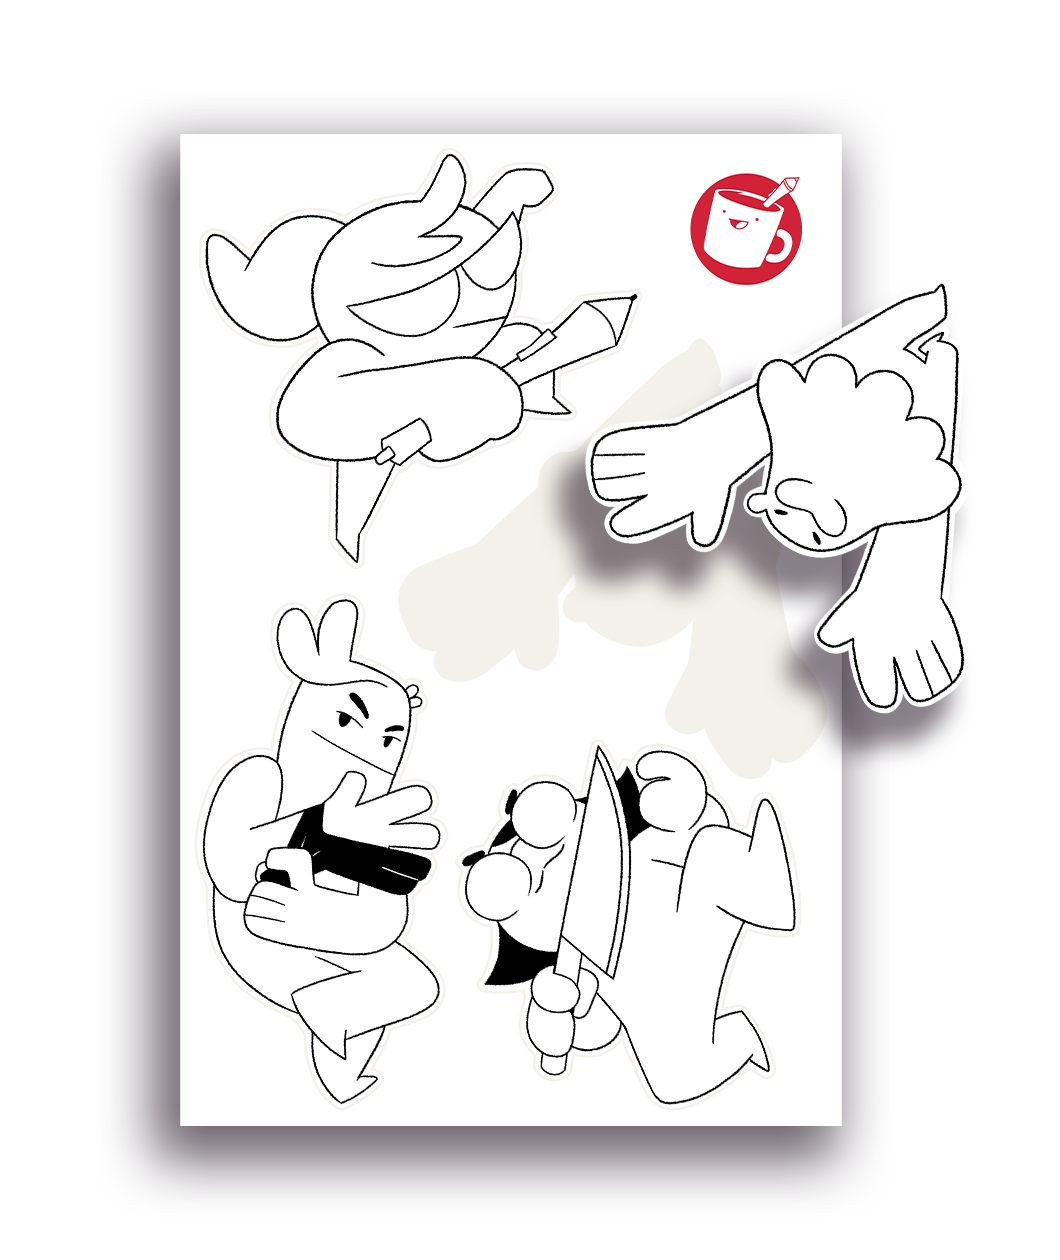 A sticker sheet with the Drawfee logo in the top right. There are four sticker of people and creatures in black and white doodle form. 